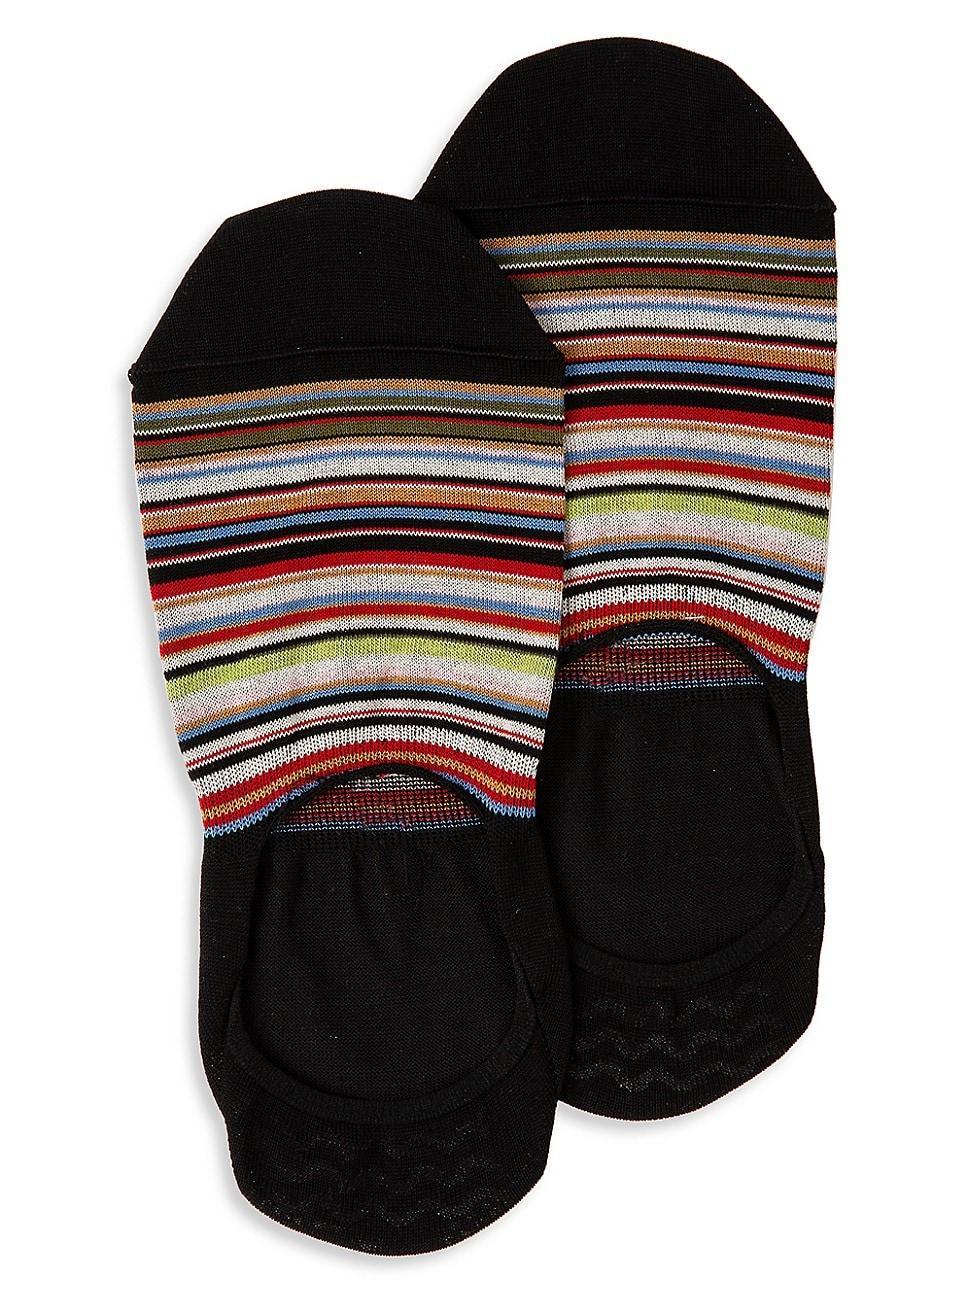 No-Show Striped Socks Product Image